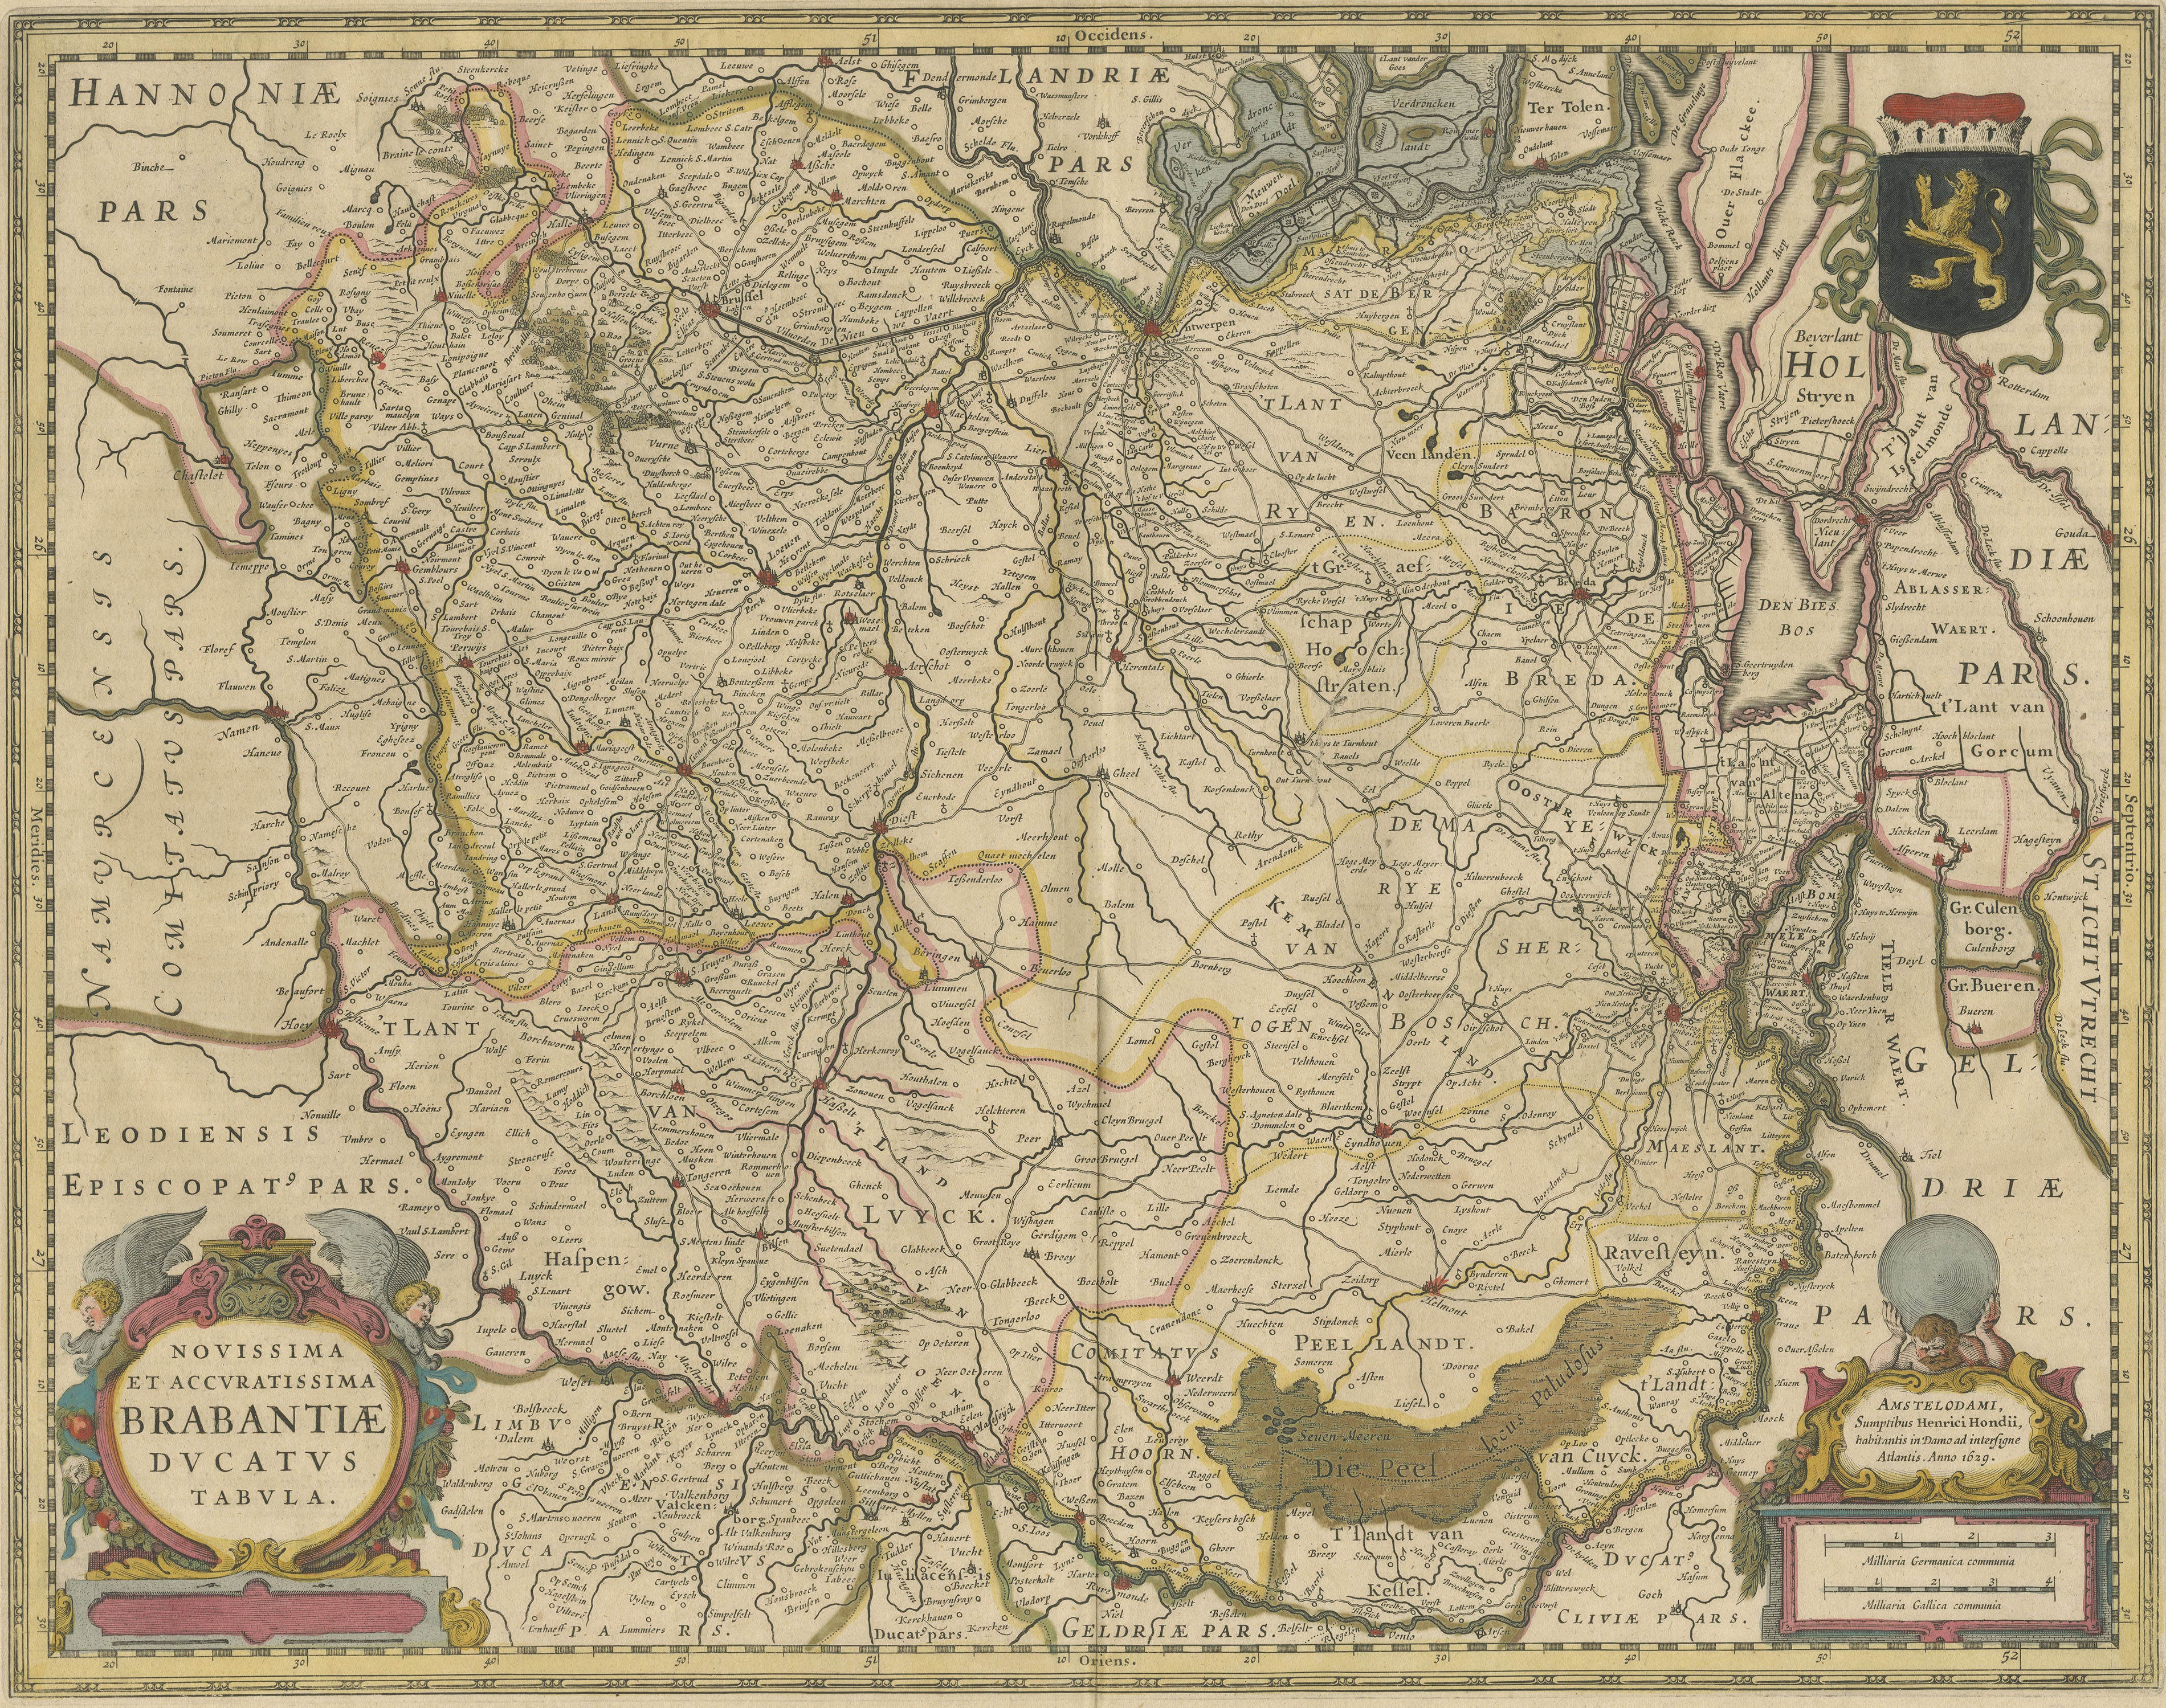 Original antique map titled 'Novissima et Accuratissima Brabantiae Ducatus Tabula'. Old map of Brabant, the Netherlands. North is to the right. Like all other maps of Brabantiae Ducatus, it encloses the area between the rivers Rhine, Maas and